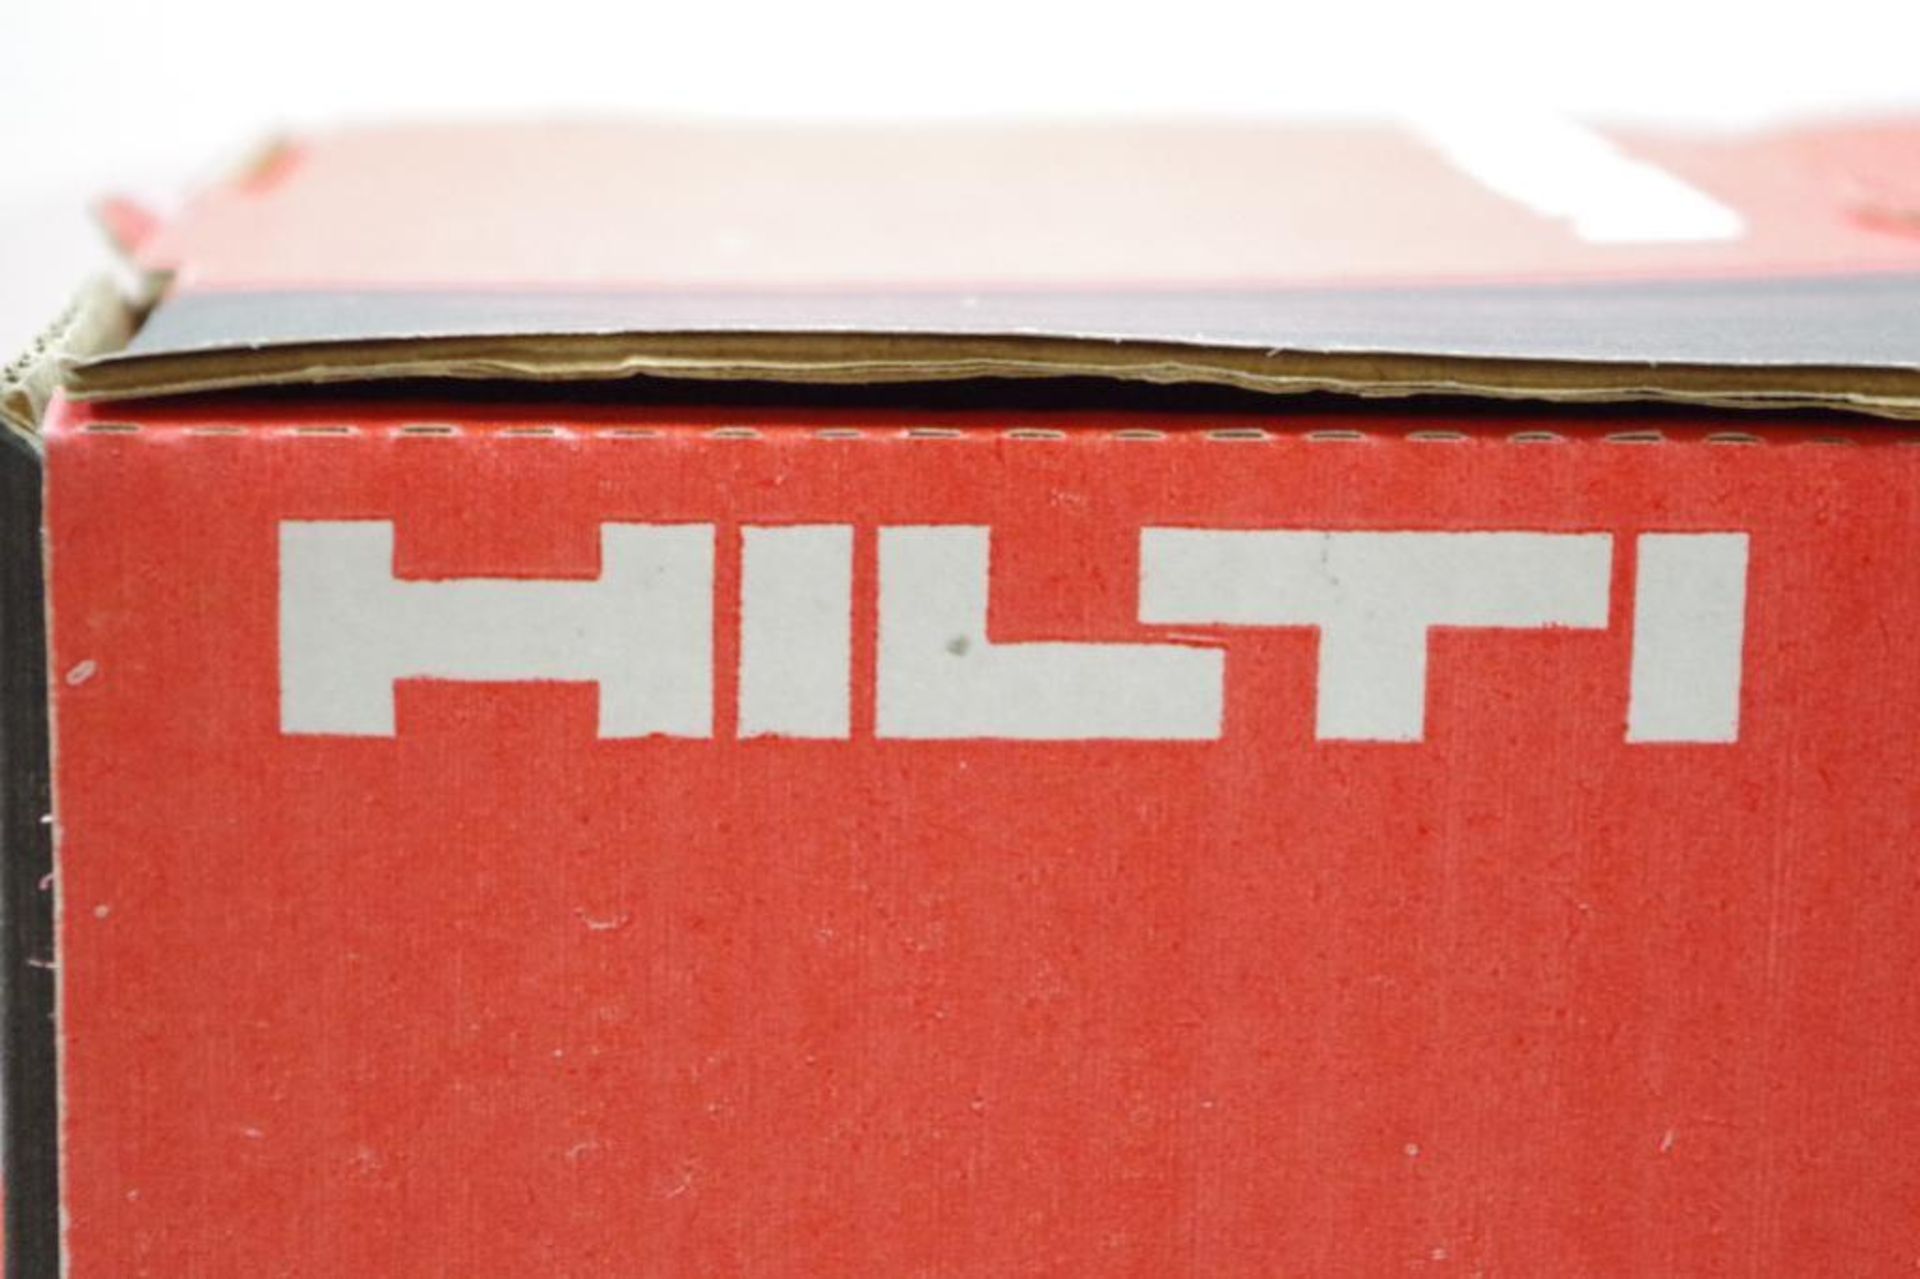 [800] HILTI Soft Washer Fasteners X-SW 30 ZF37, M/N 387675 (8 Boxes of 100) - Image 4 of 4